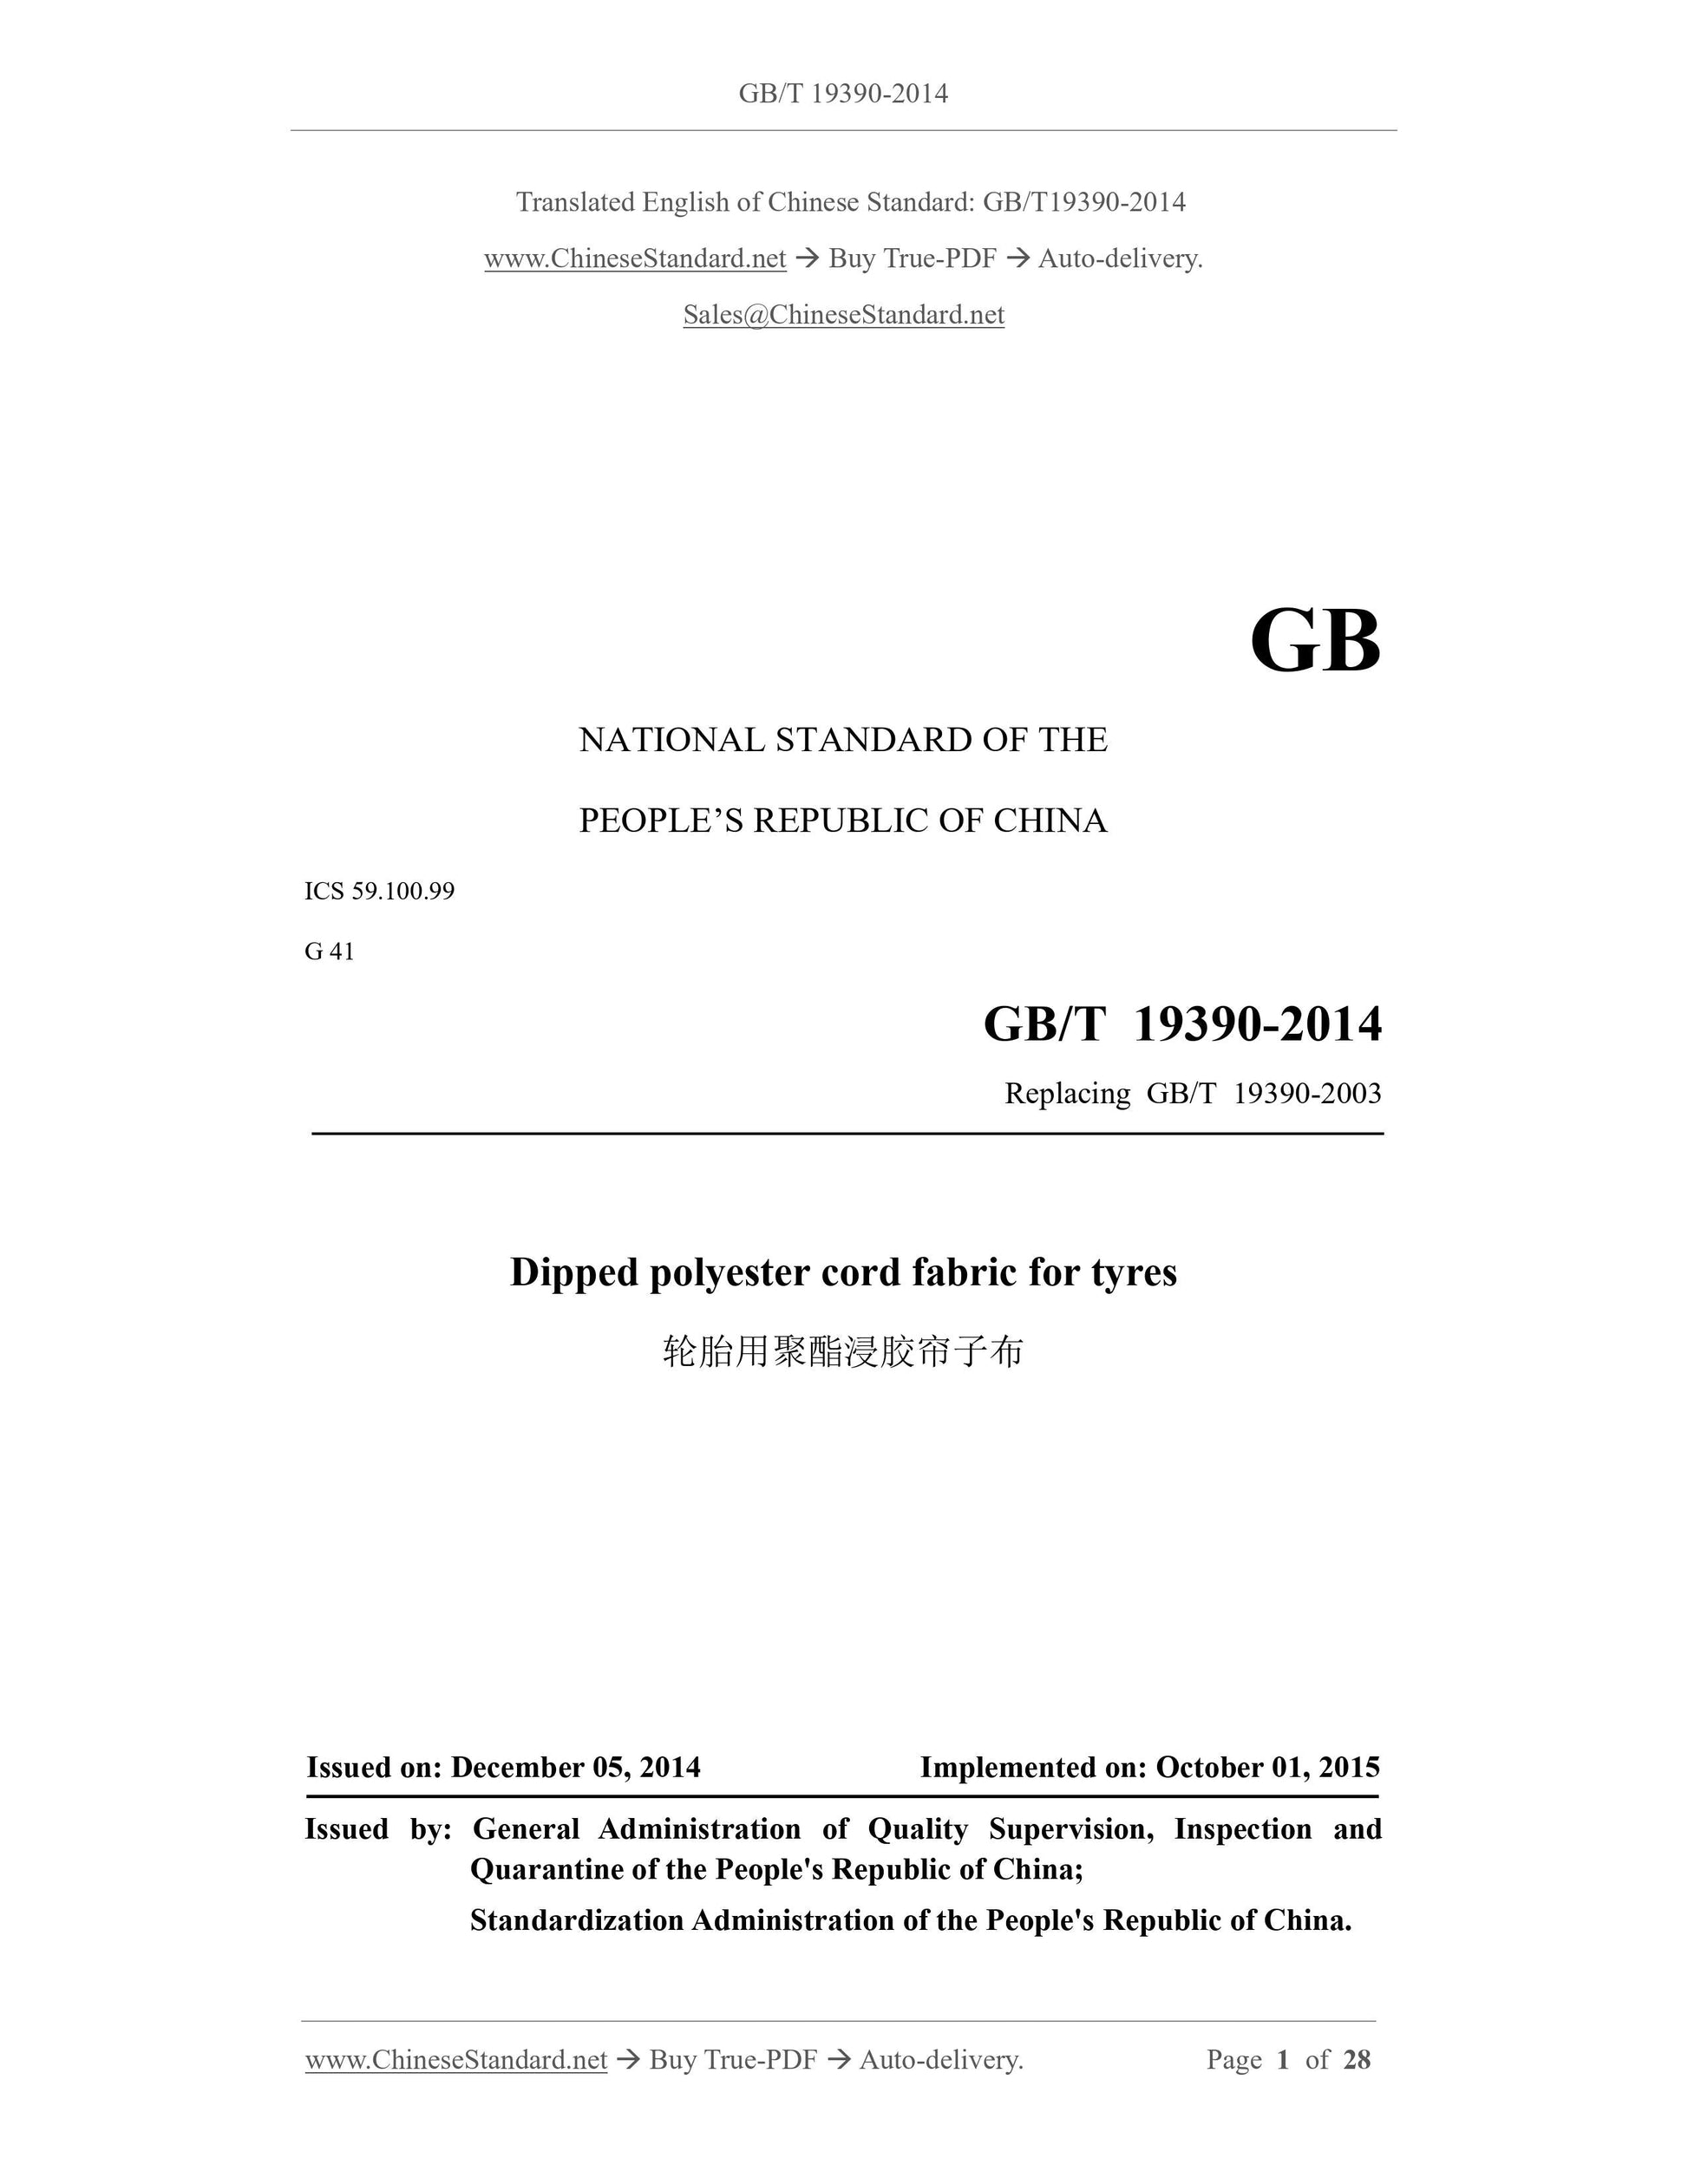 GB/T 19390-2014 Page 1